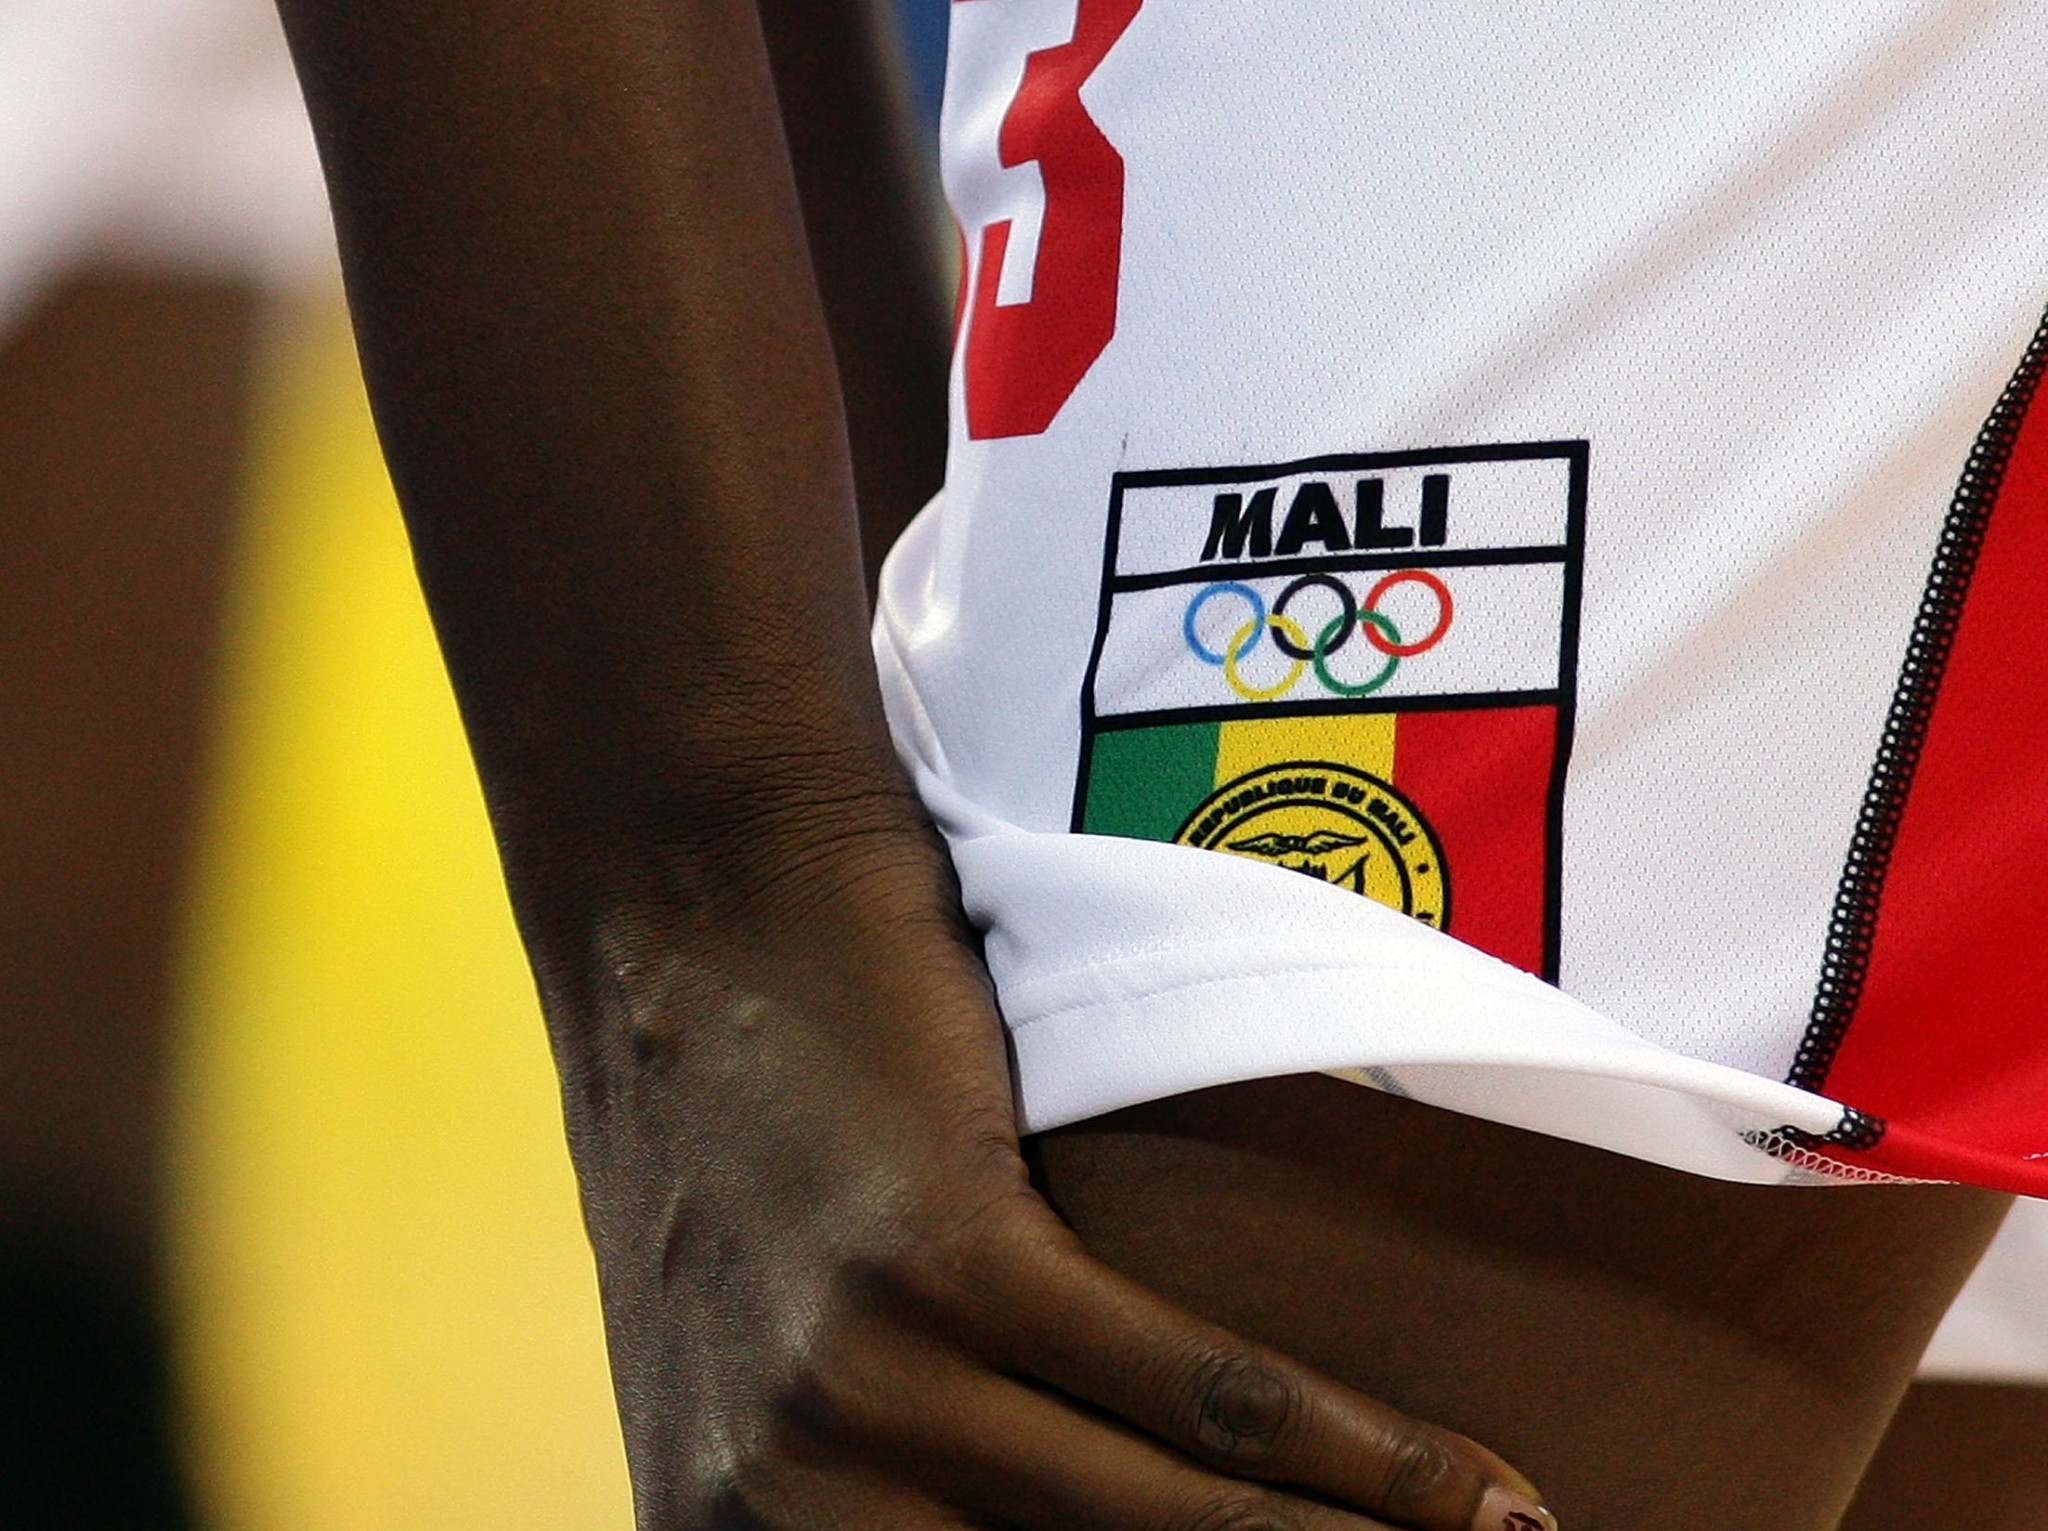 SRA accuses McLaren investigation into Malian basketball of failing to protect witnesses, demands further action from FIBA